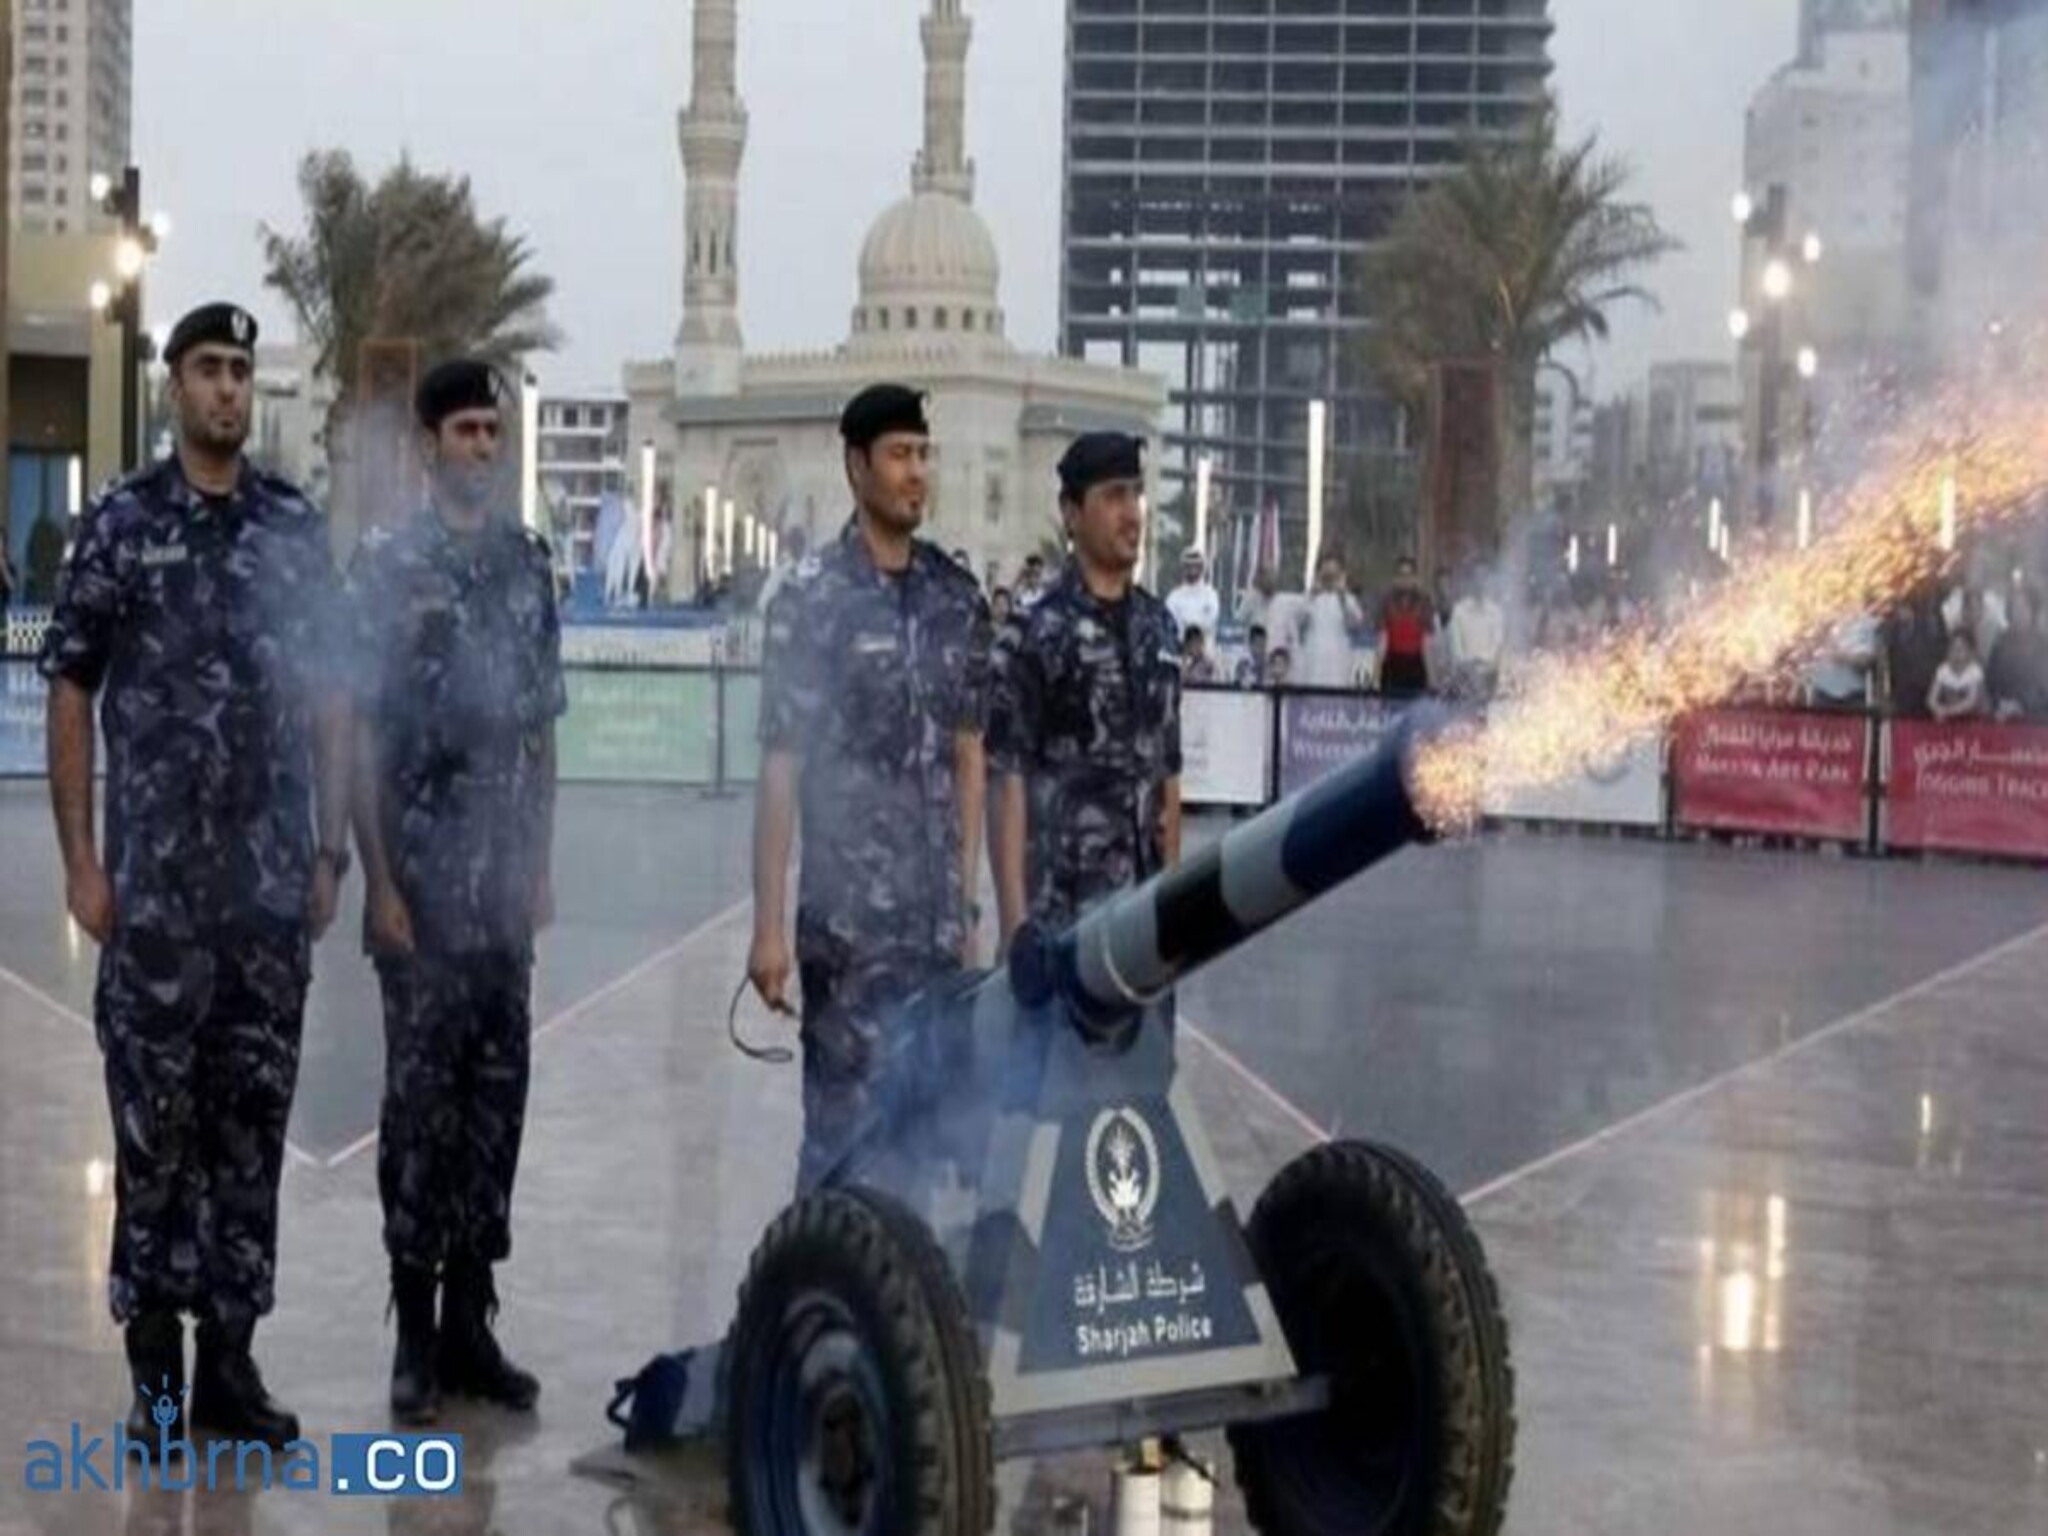 UAE: Sharjah Police to Launch Iftar Cannons at Five Locations